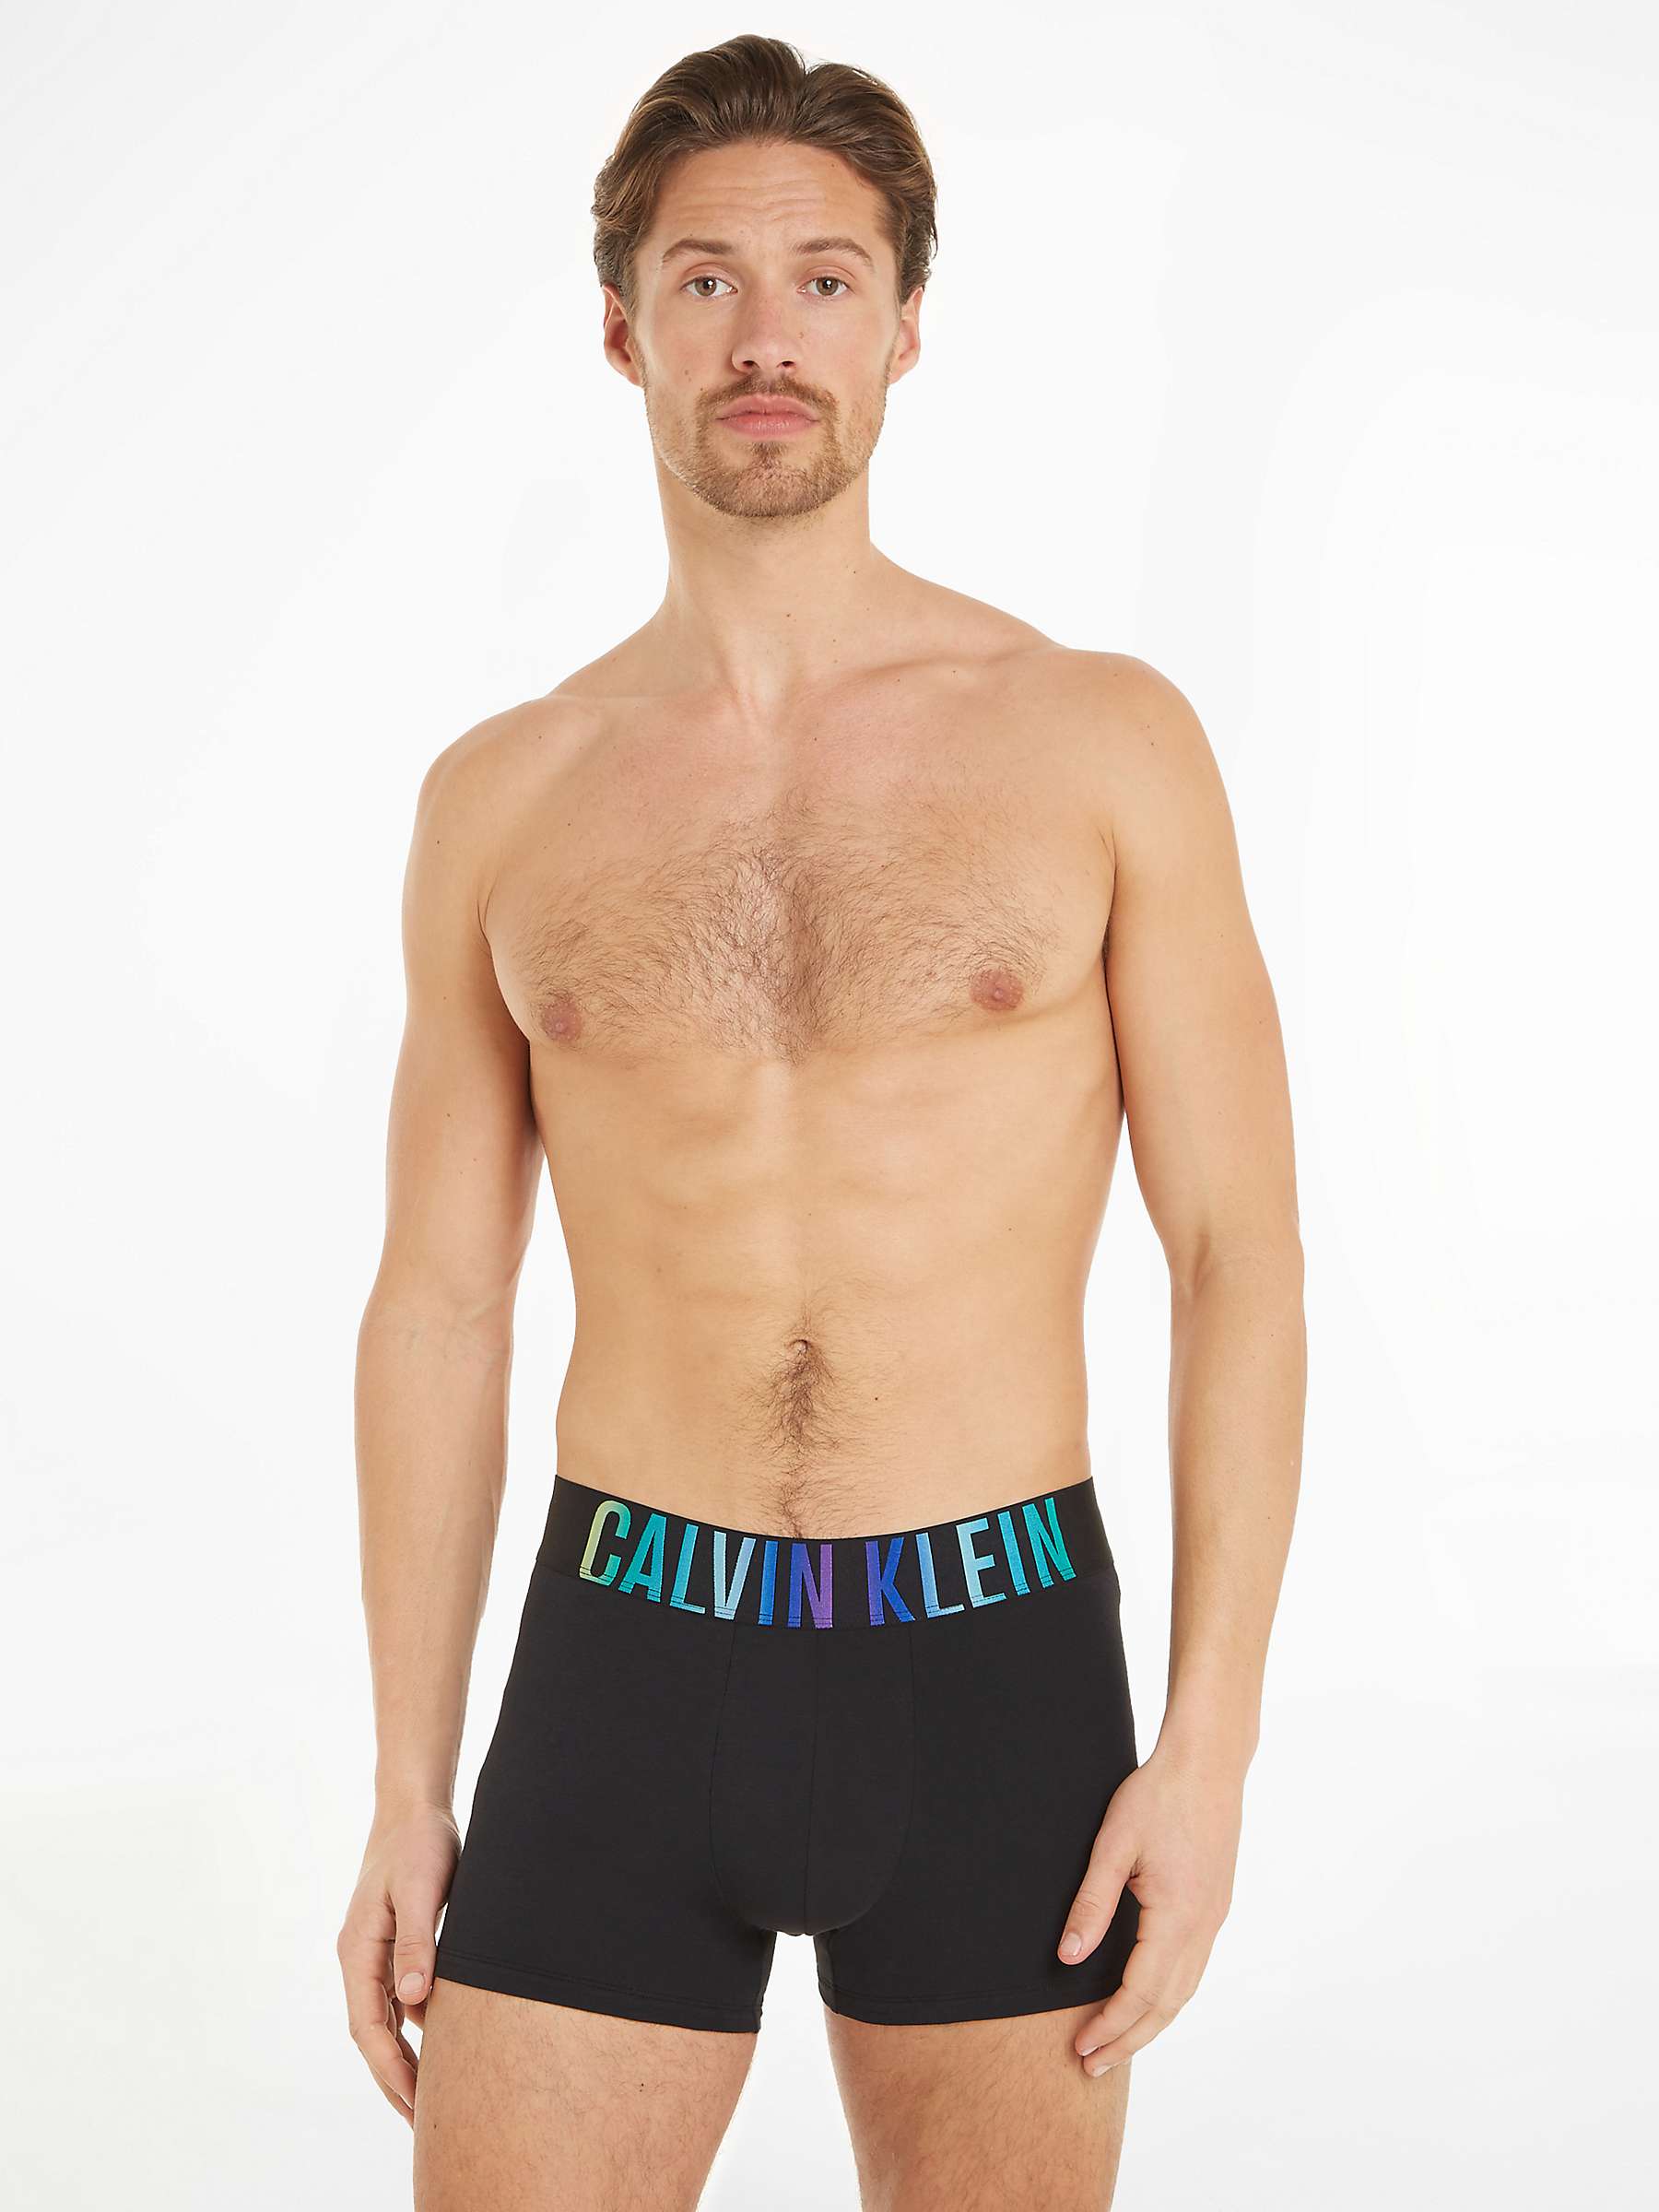 Buy Calvin Klein Rainbow Recycled Trunks Online at johnlewis.com